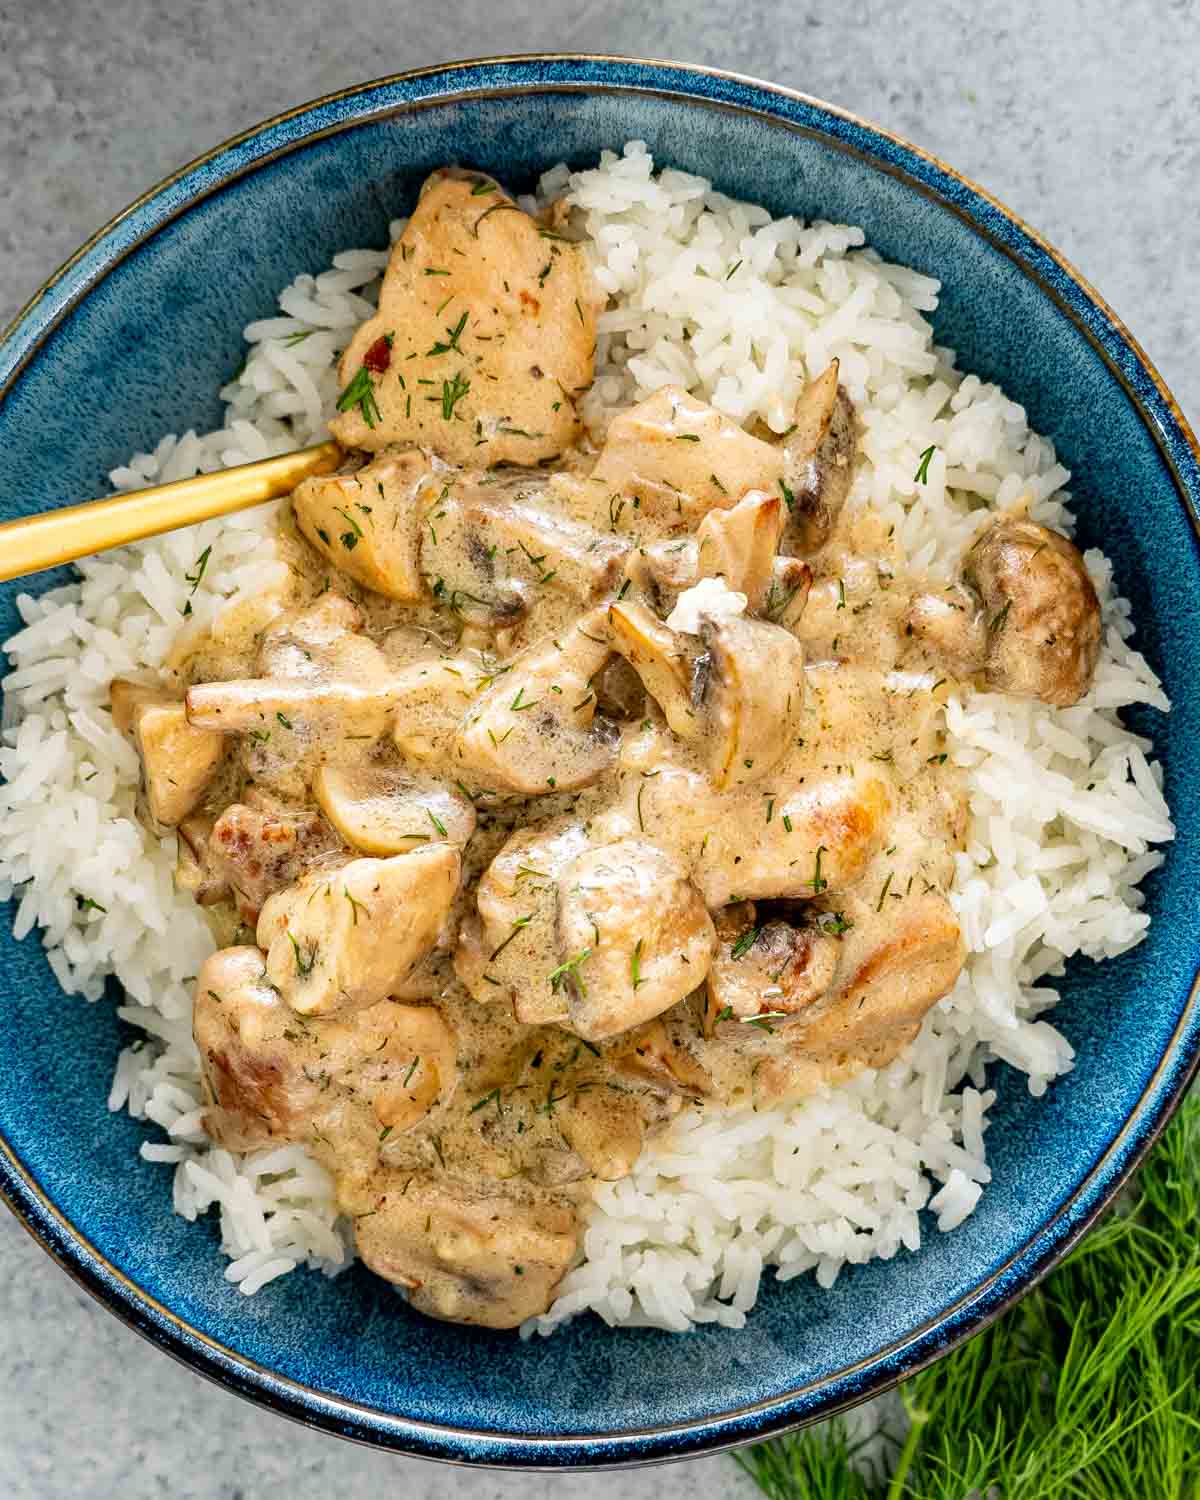 chicken and mushroom in creamy dill sauce over a bed of rice in a blue bowl.